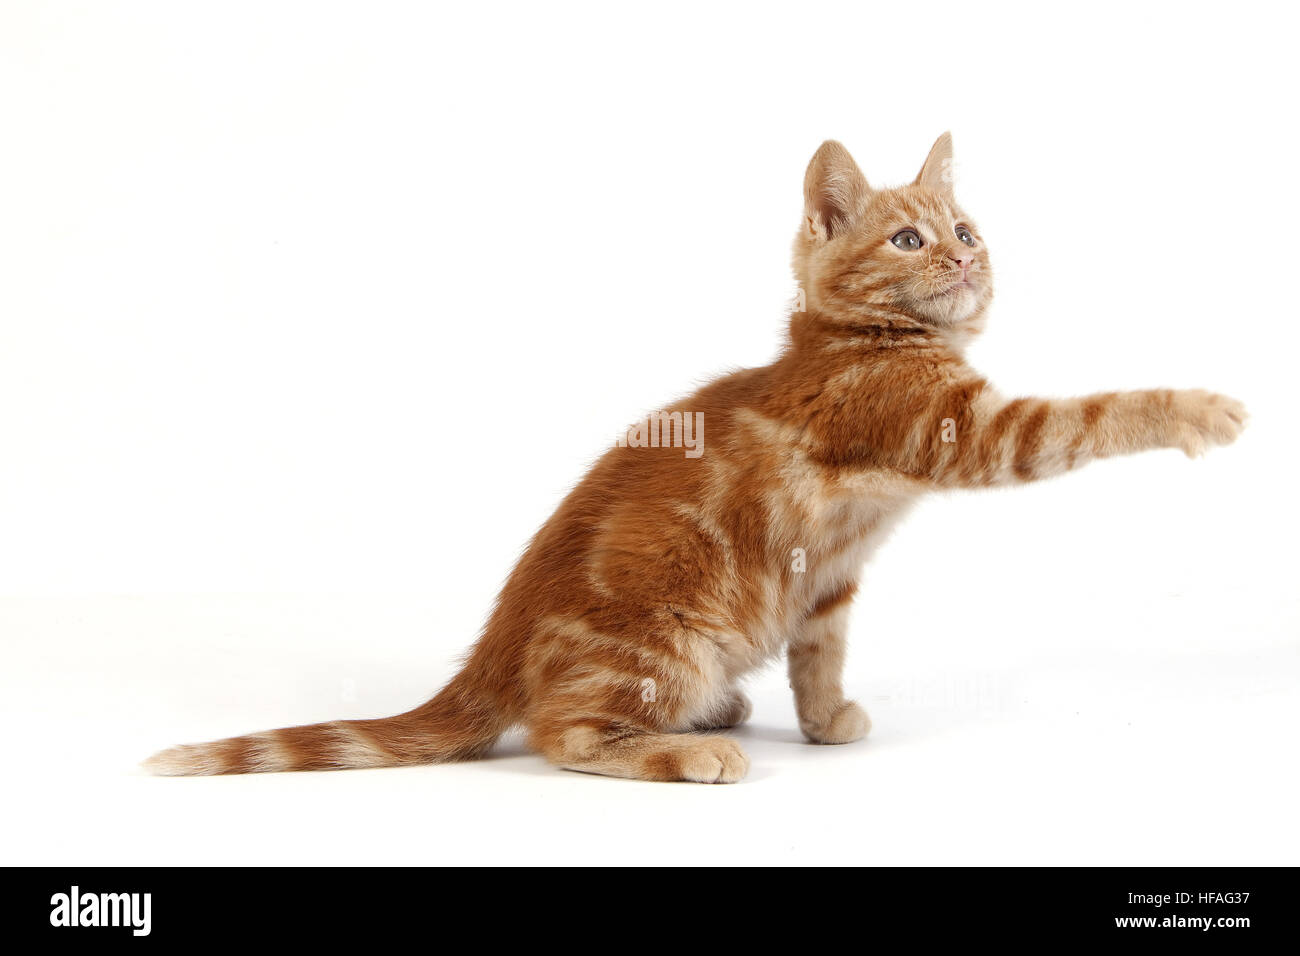 Red Tabby Domestic Cat, Kitten playing against White Background Stock Photo